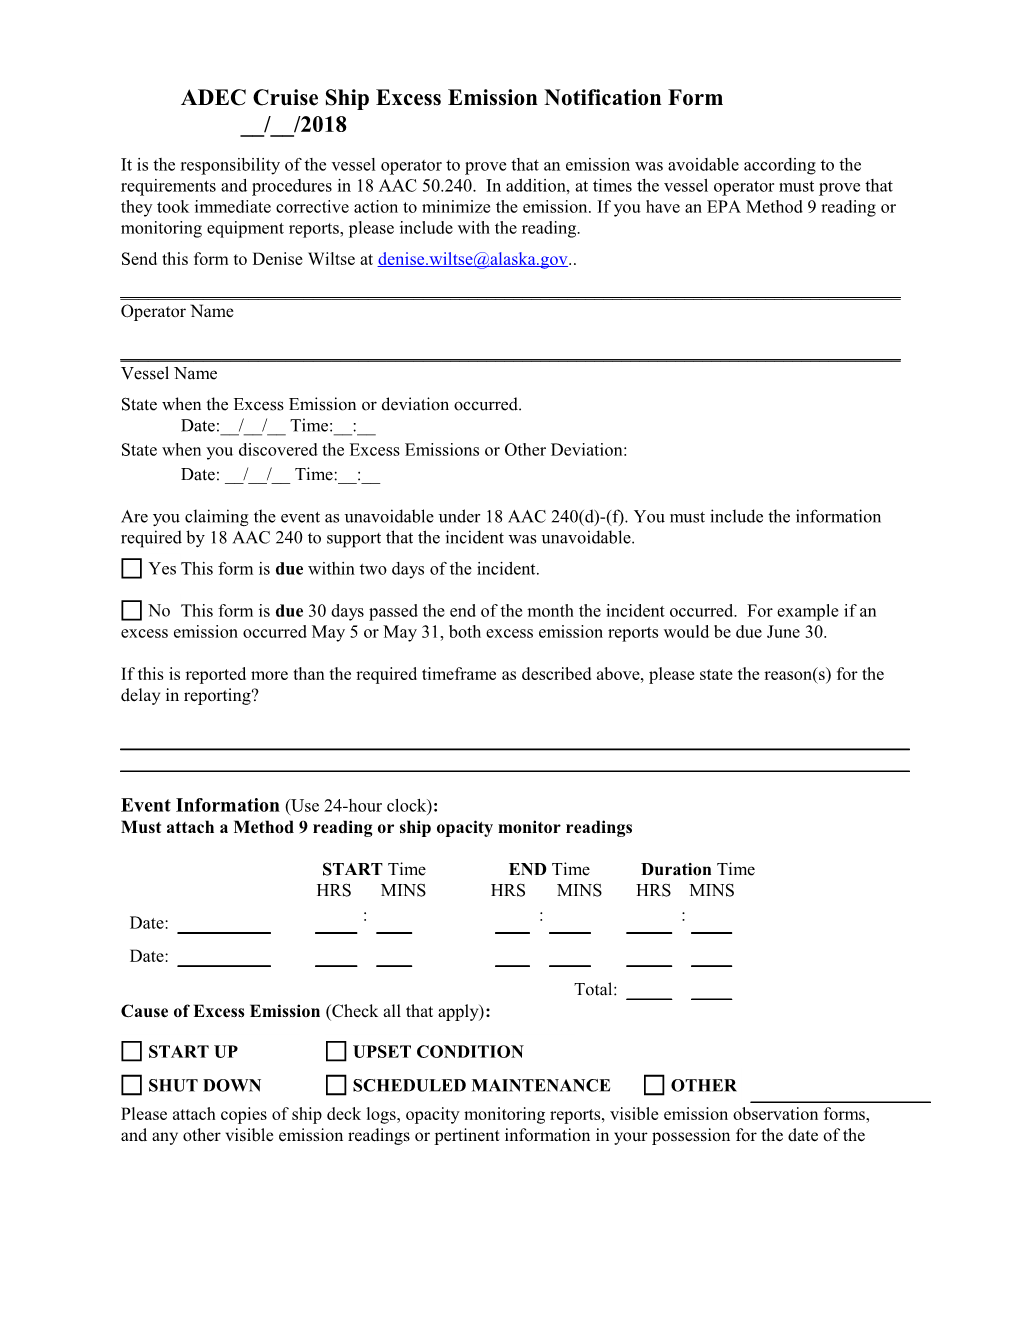 ADEC Cruise Ship Excess Emission Notification Form